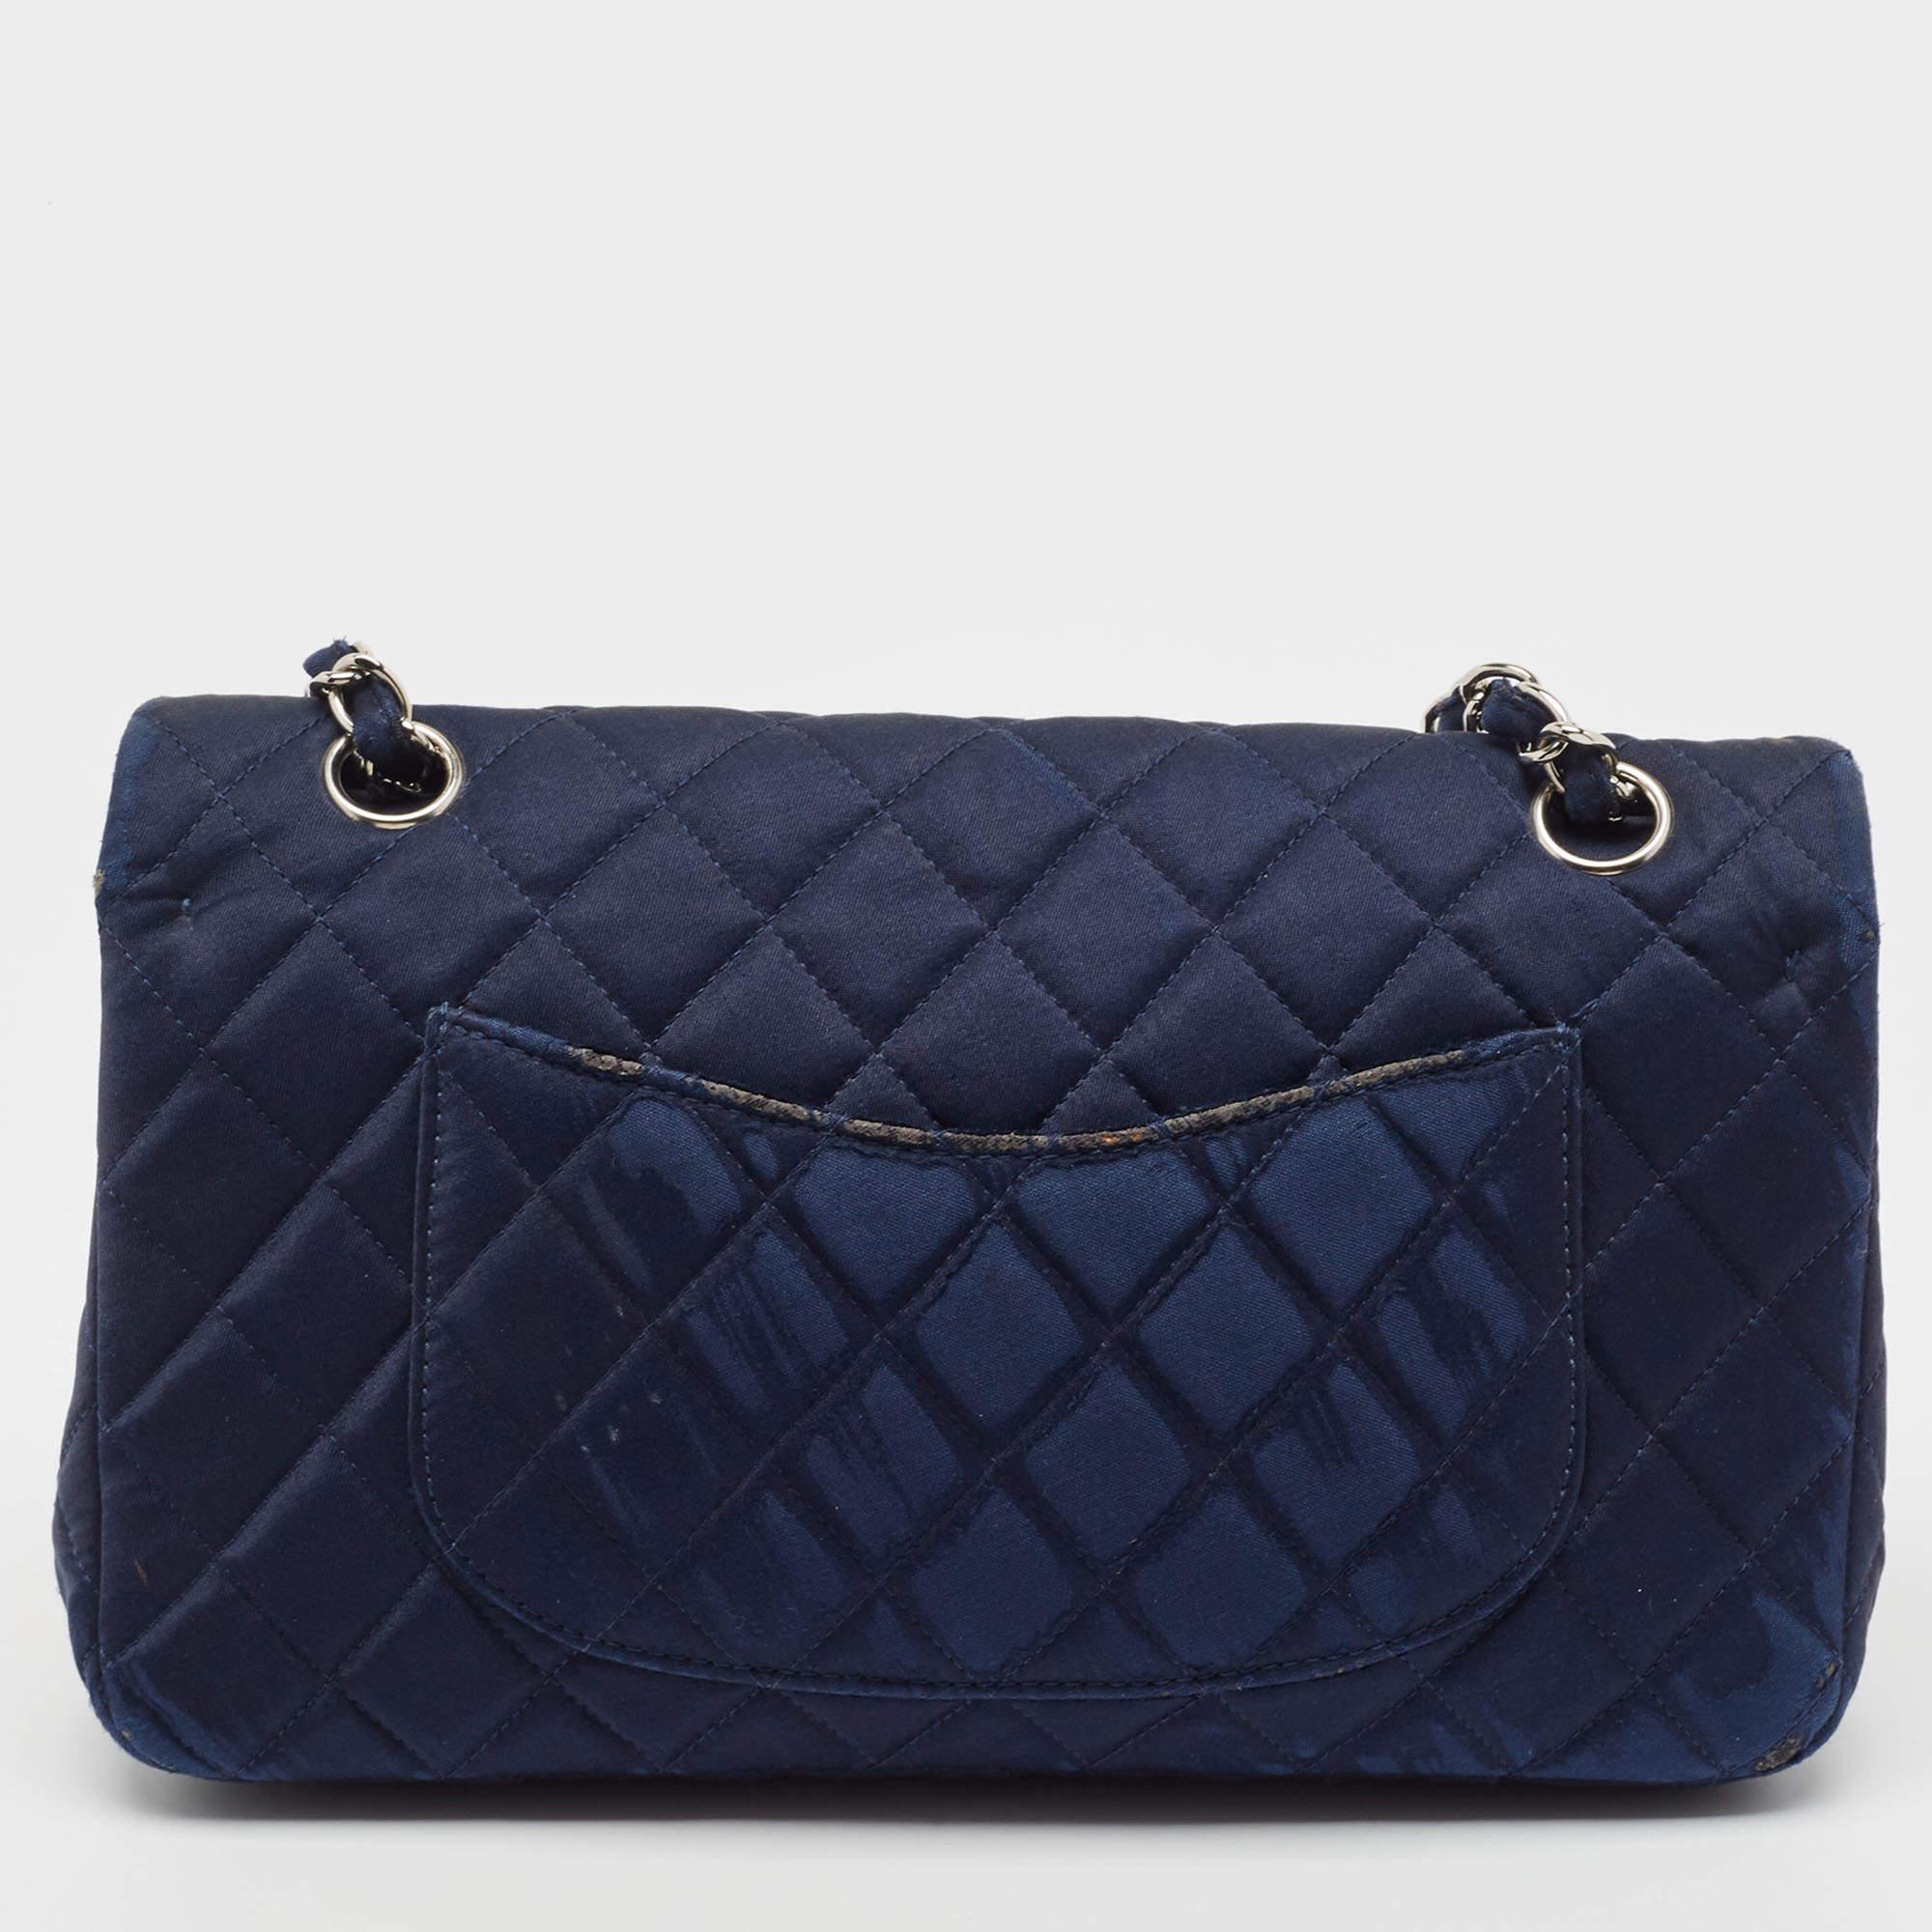 Chanel Navy Blue Quilted Satin Medium Classic Double Flap Bag For Sale 3